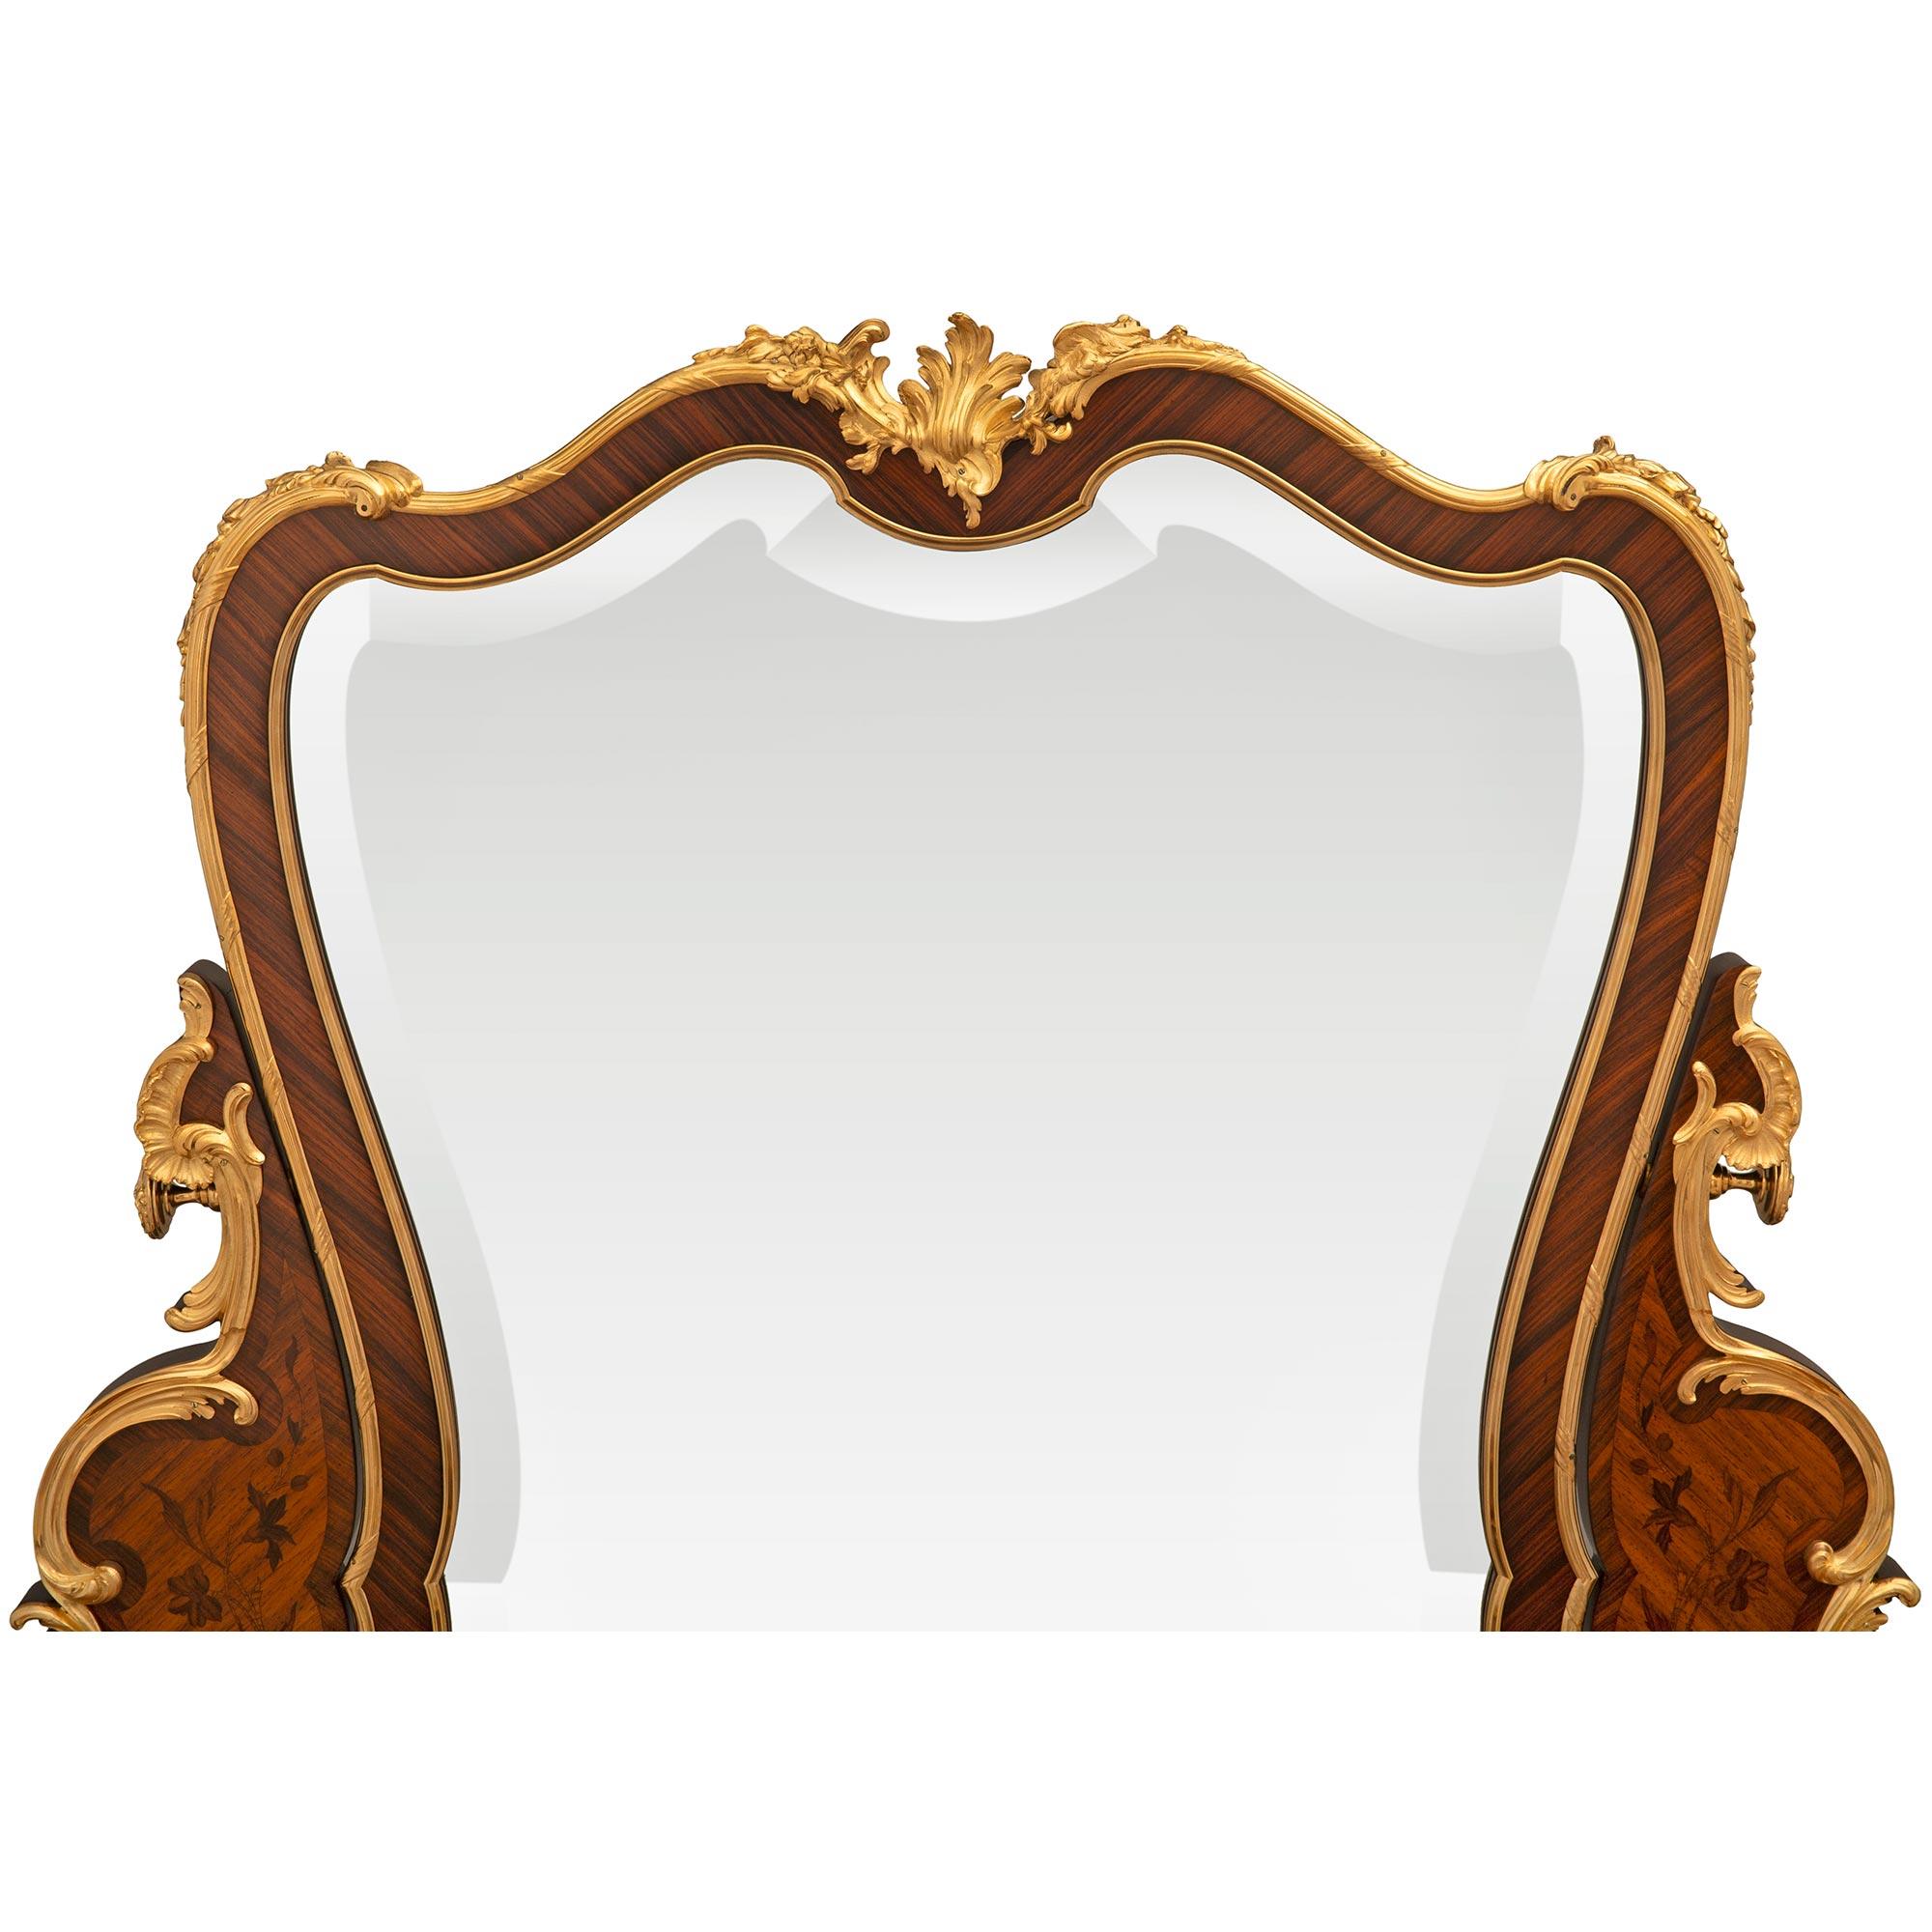 Mirror French 19th Century Louis XV St. Tulipwood, Kingwood And Ormolu Vanity Table For Sale